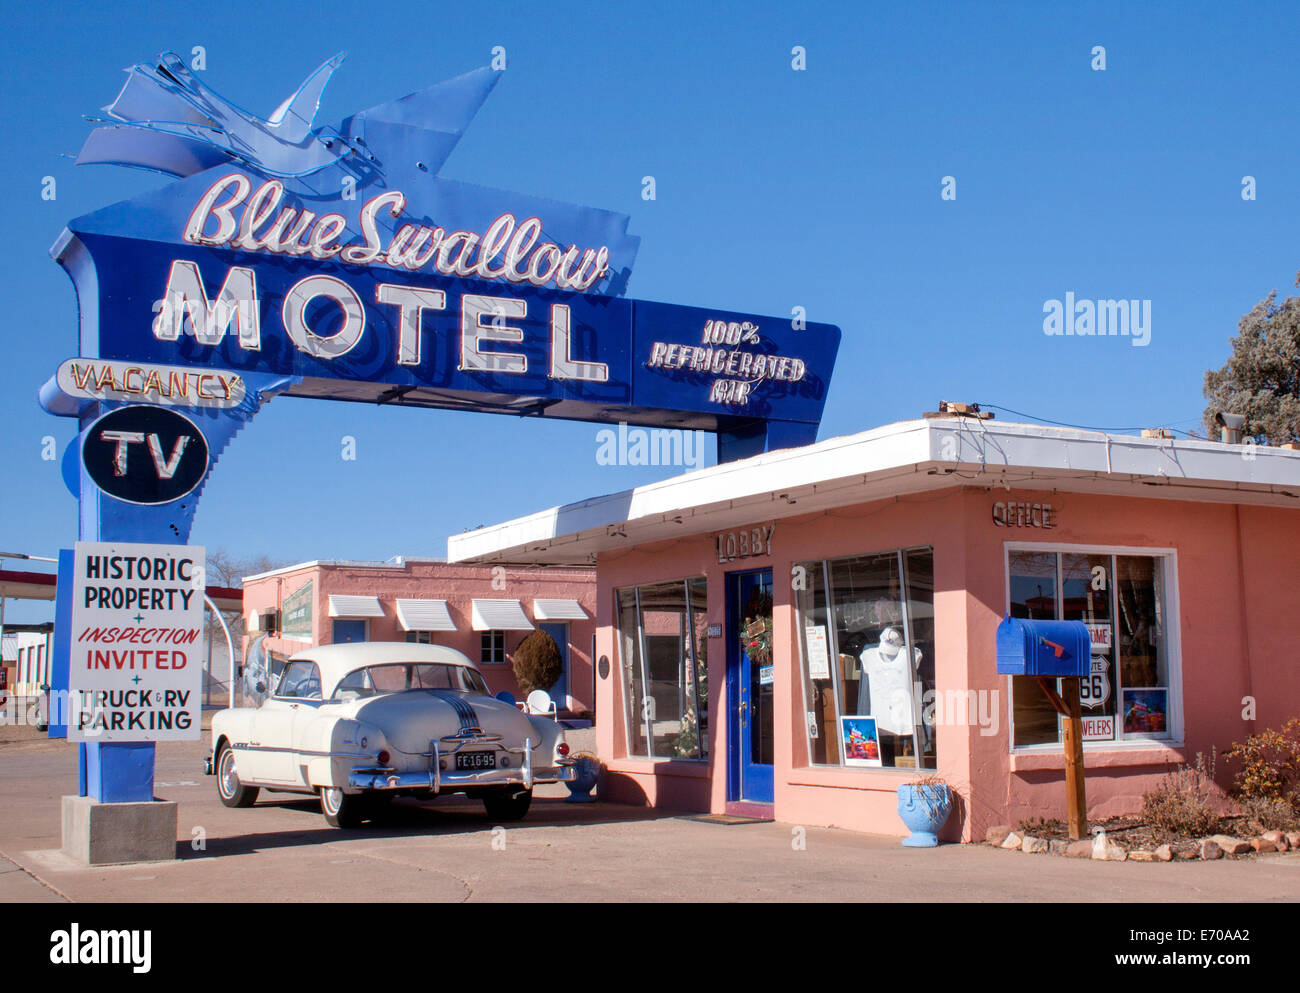 The Blue Swallow Motel located on old Route 66 in Tucumcari New Mexico Stock Photo